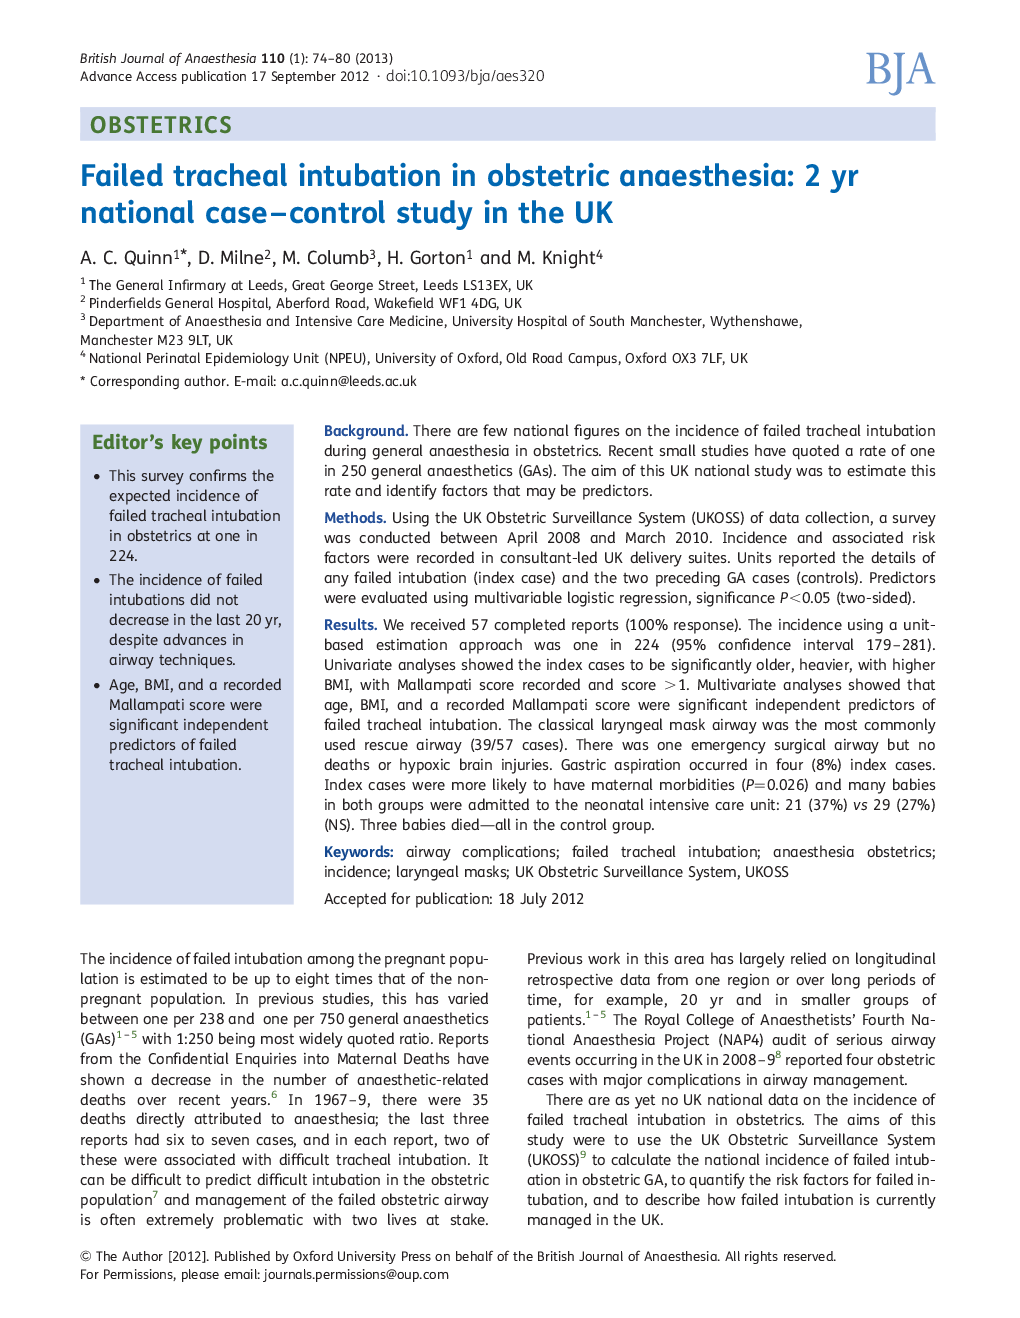 Failed tracheal intubation in obstetric anaesthesia: 2 yr national case-control study in the UK